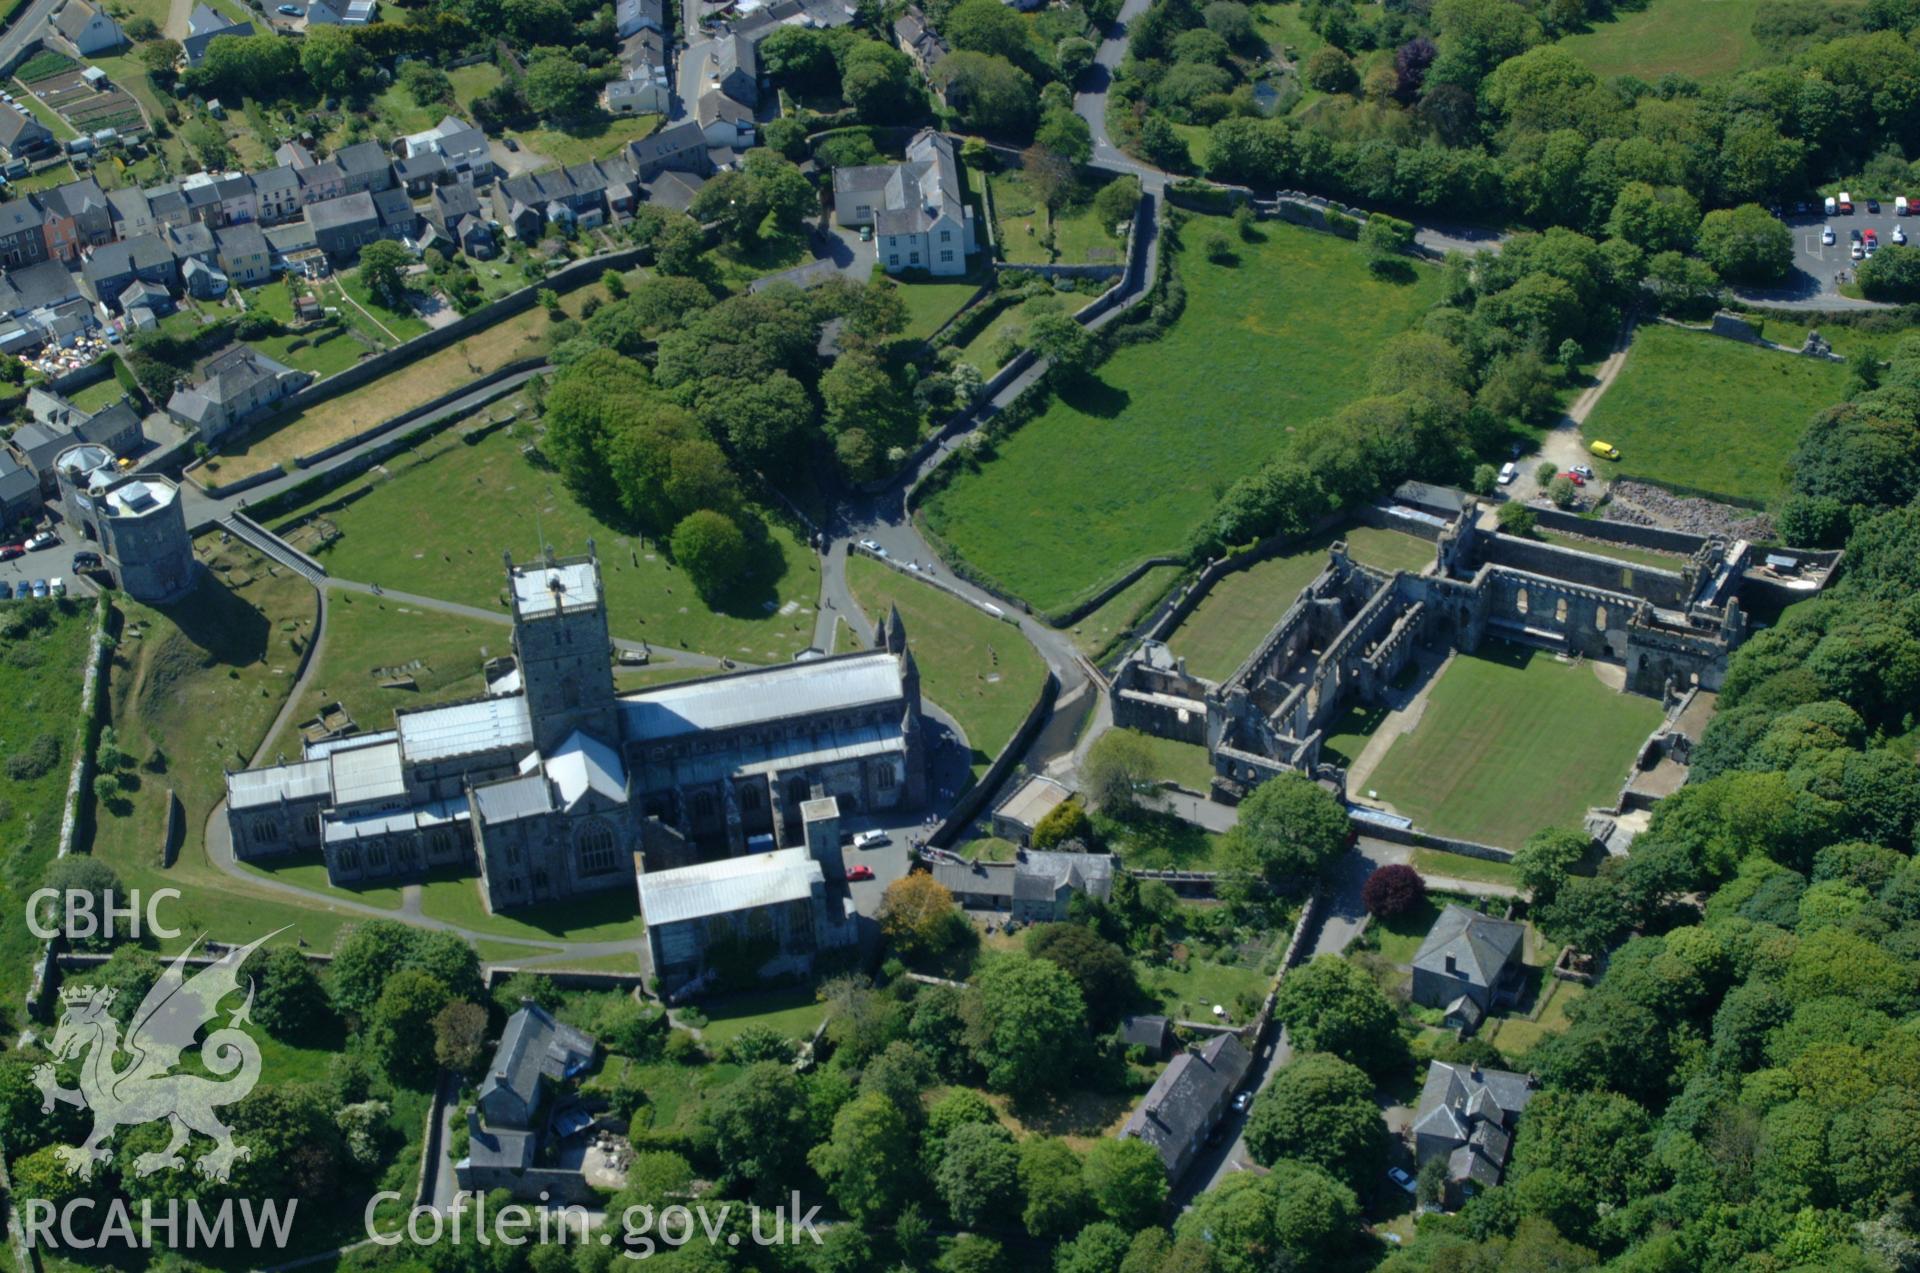 RCAHMW colour oblique aerial photograph of St David's Cathedral taken on 25/05/2004 by Toby Driver